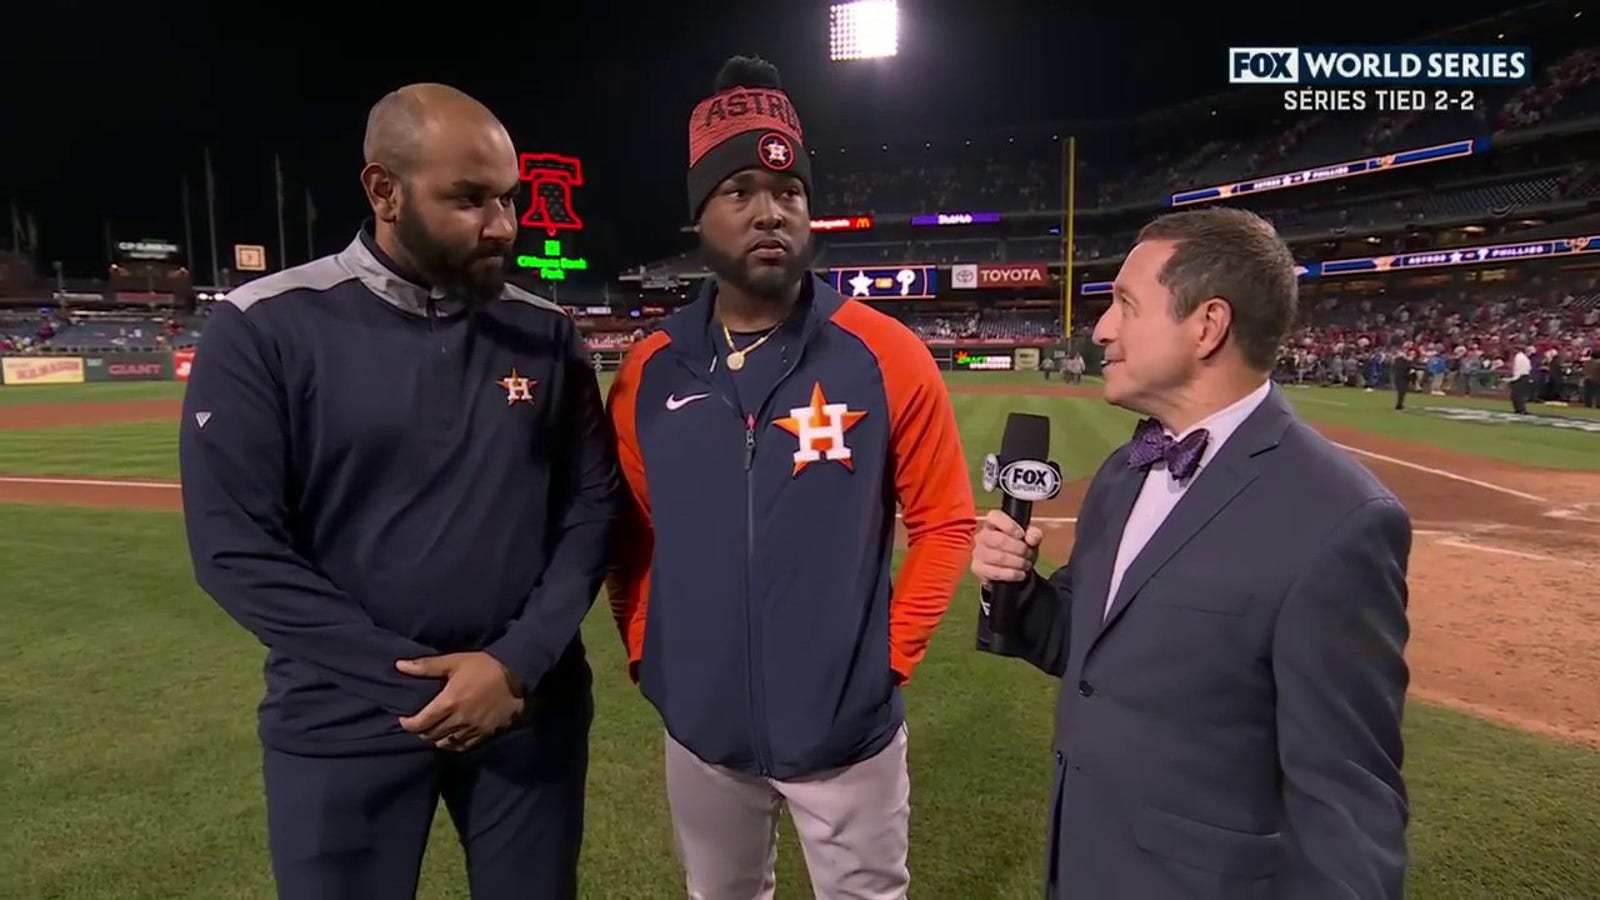 Astros' Cristian Javier discusses being part of second no-hitter in World Series history